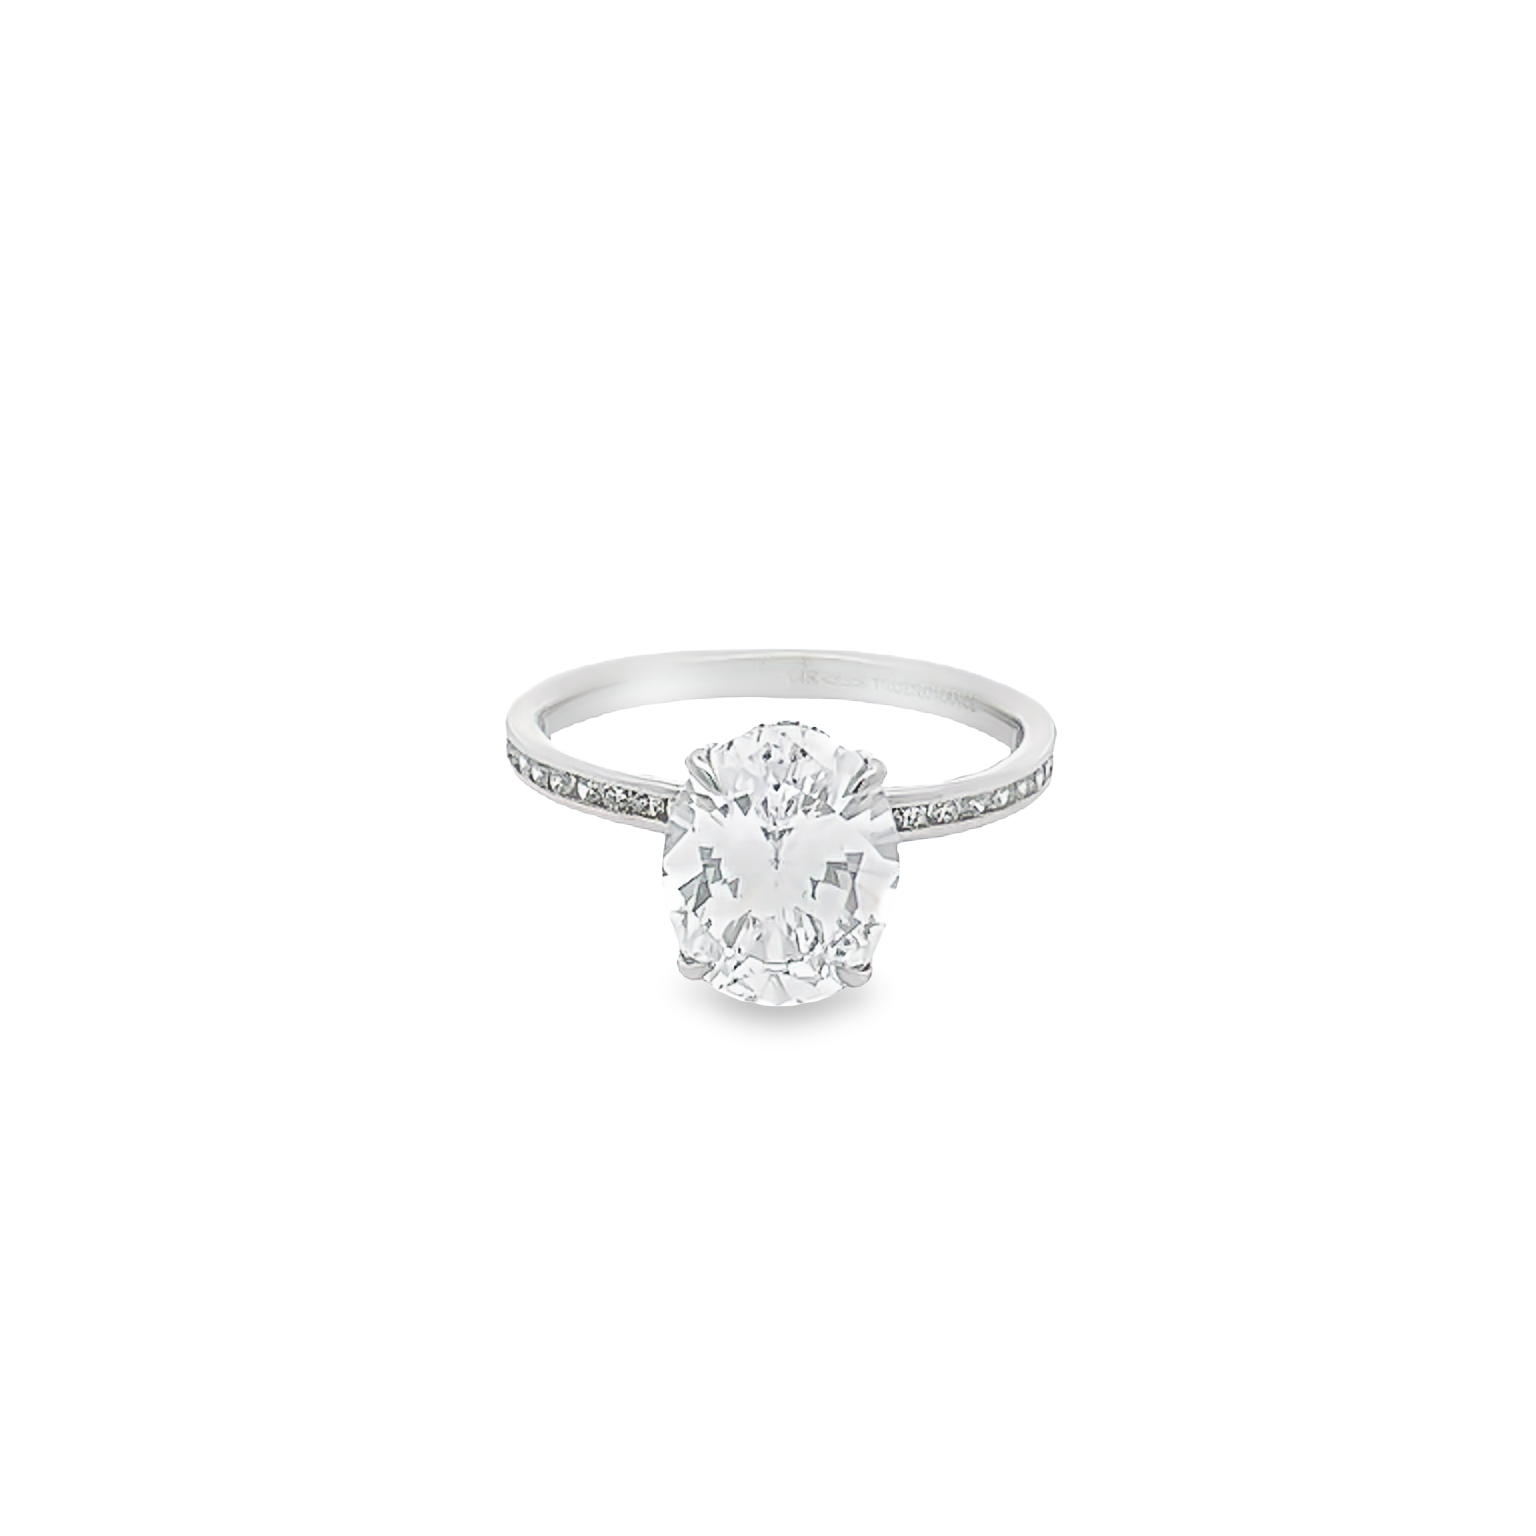 14 Karat white gold semi mount engagement ring with 40=0.33 total weight round brilliant G VS Diamonds. Size 7